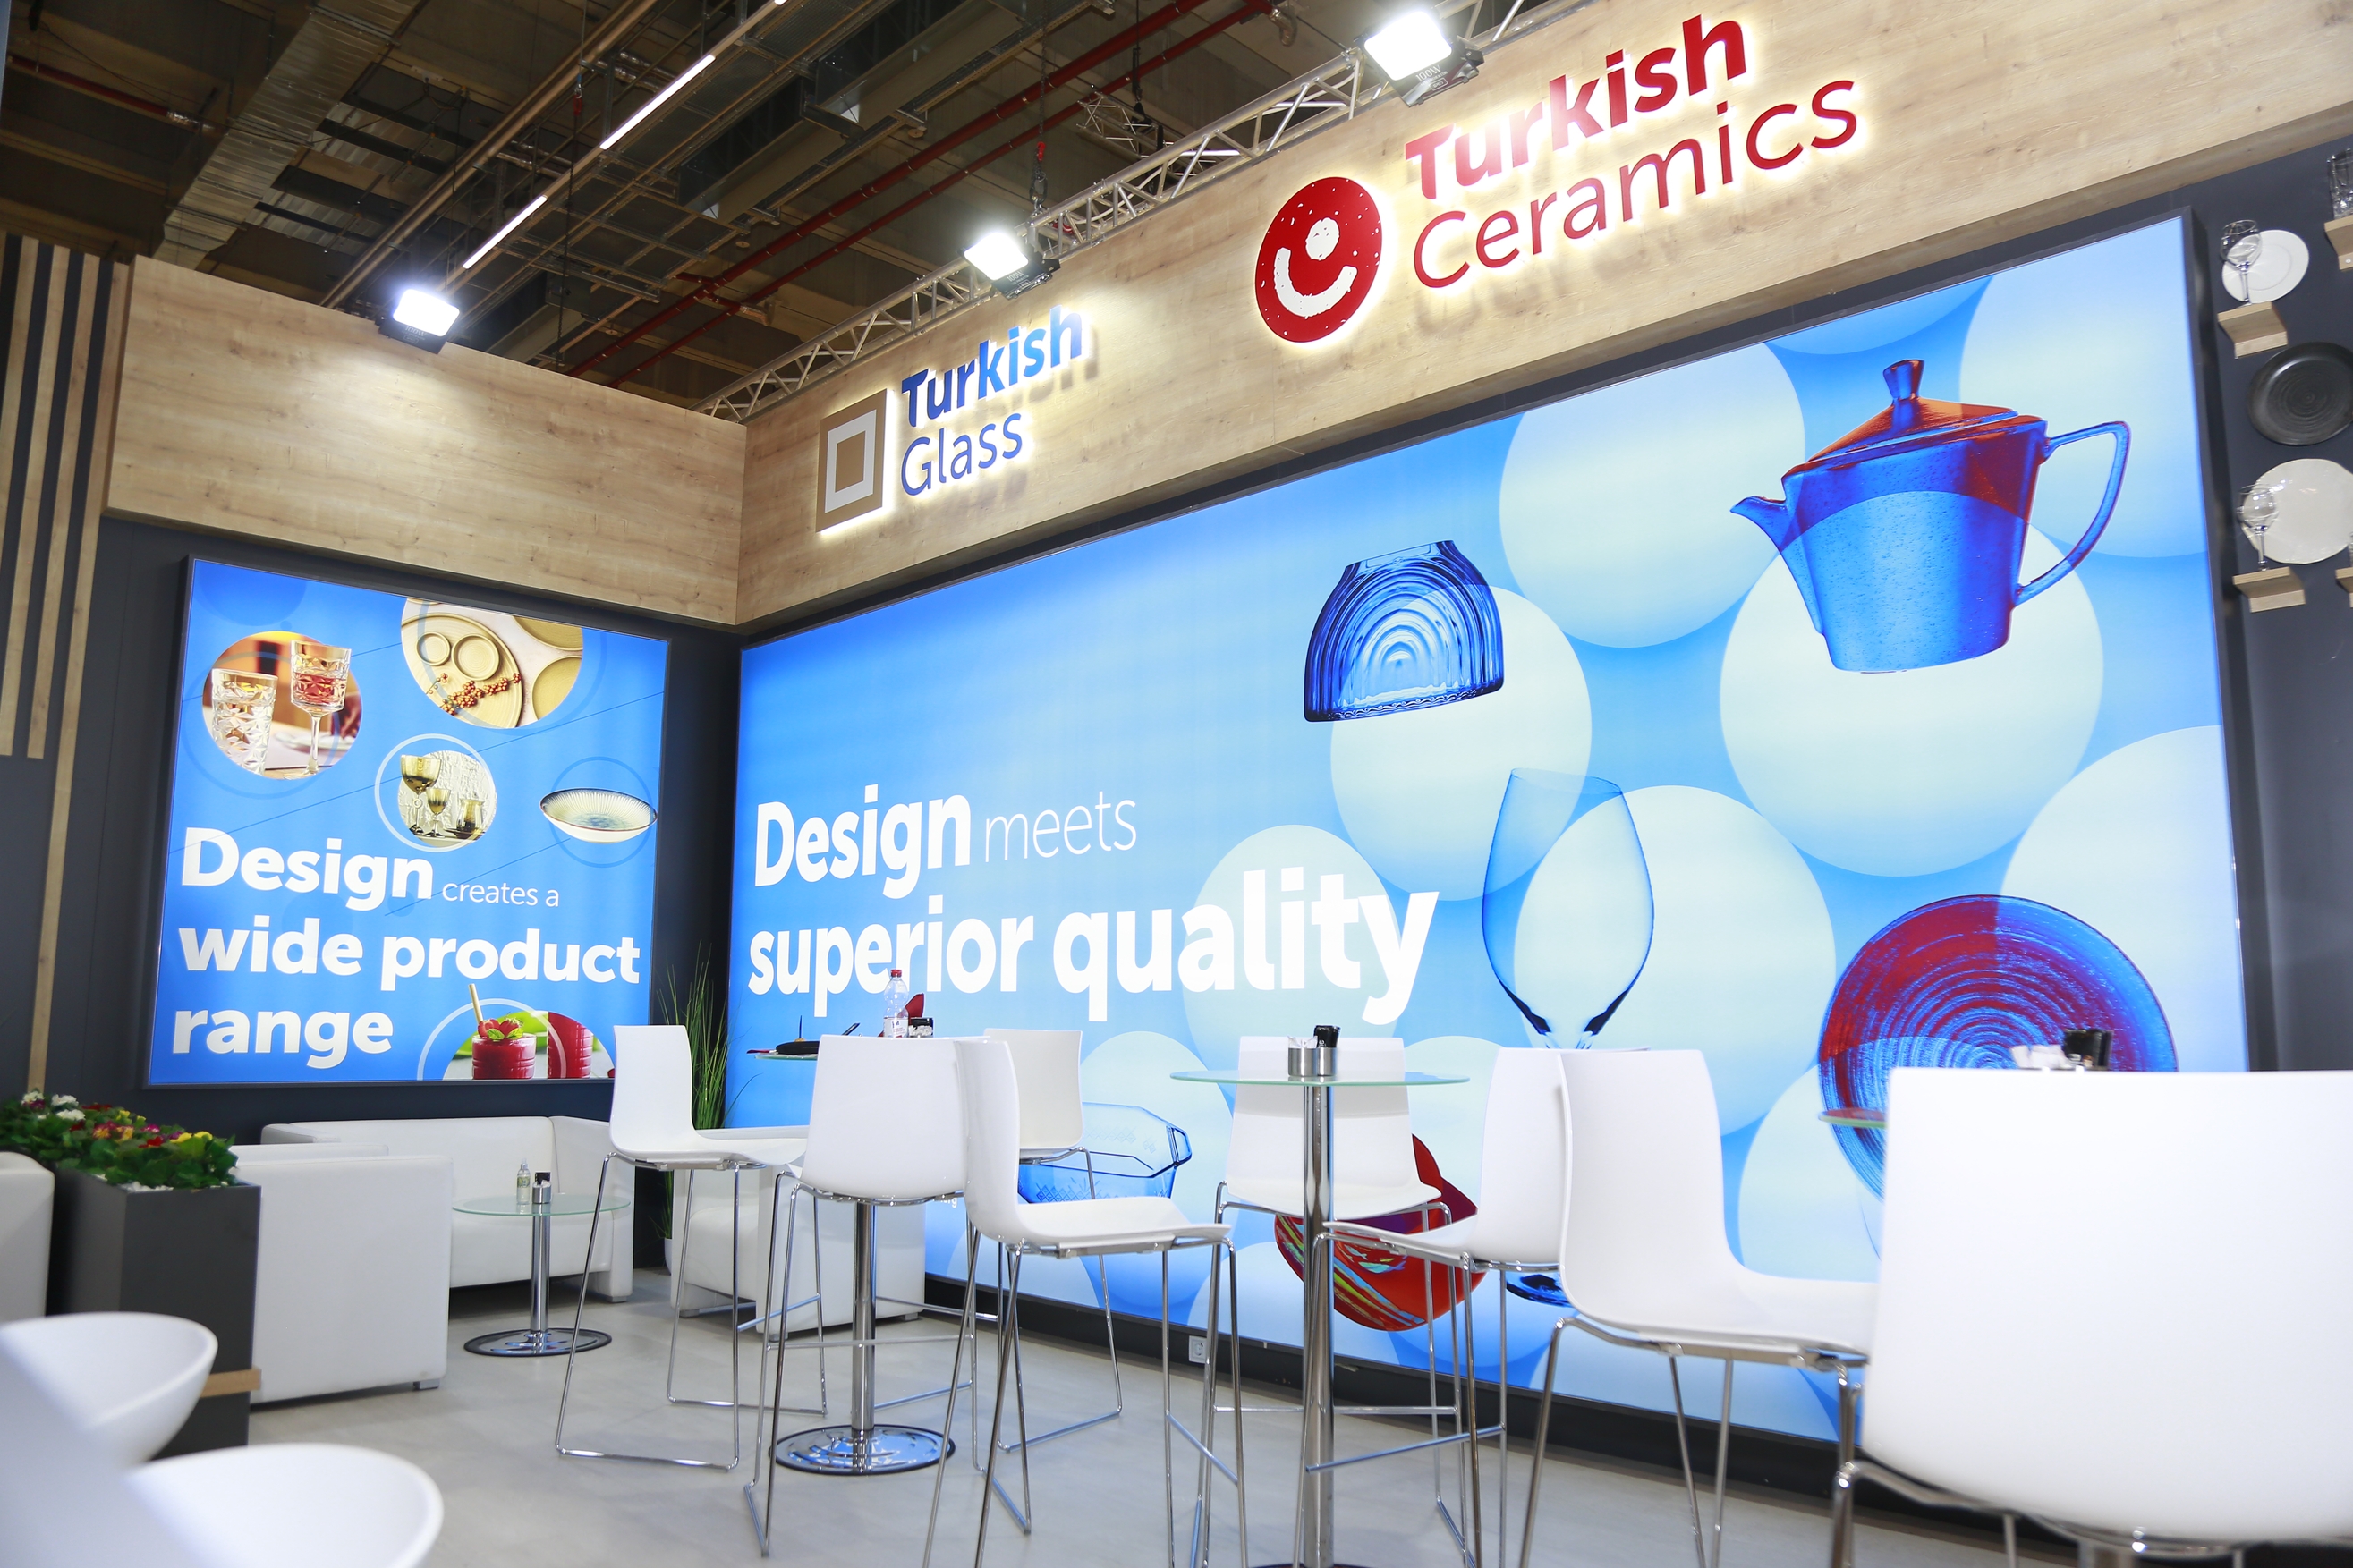 High-quality Turkish Ceramics Spanning a Wide Range Captivate the Audience at Ambiente